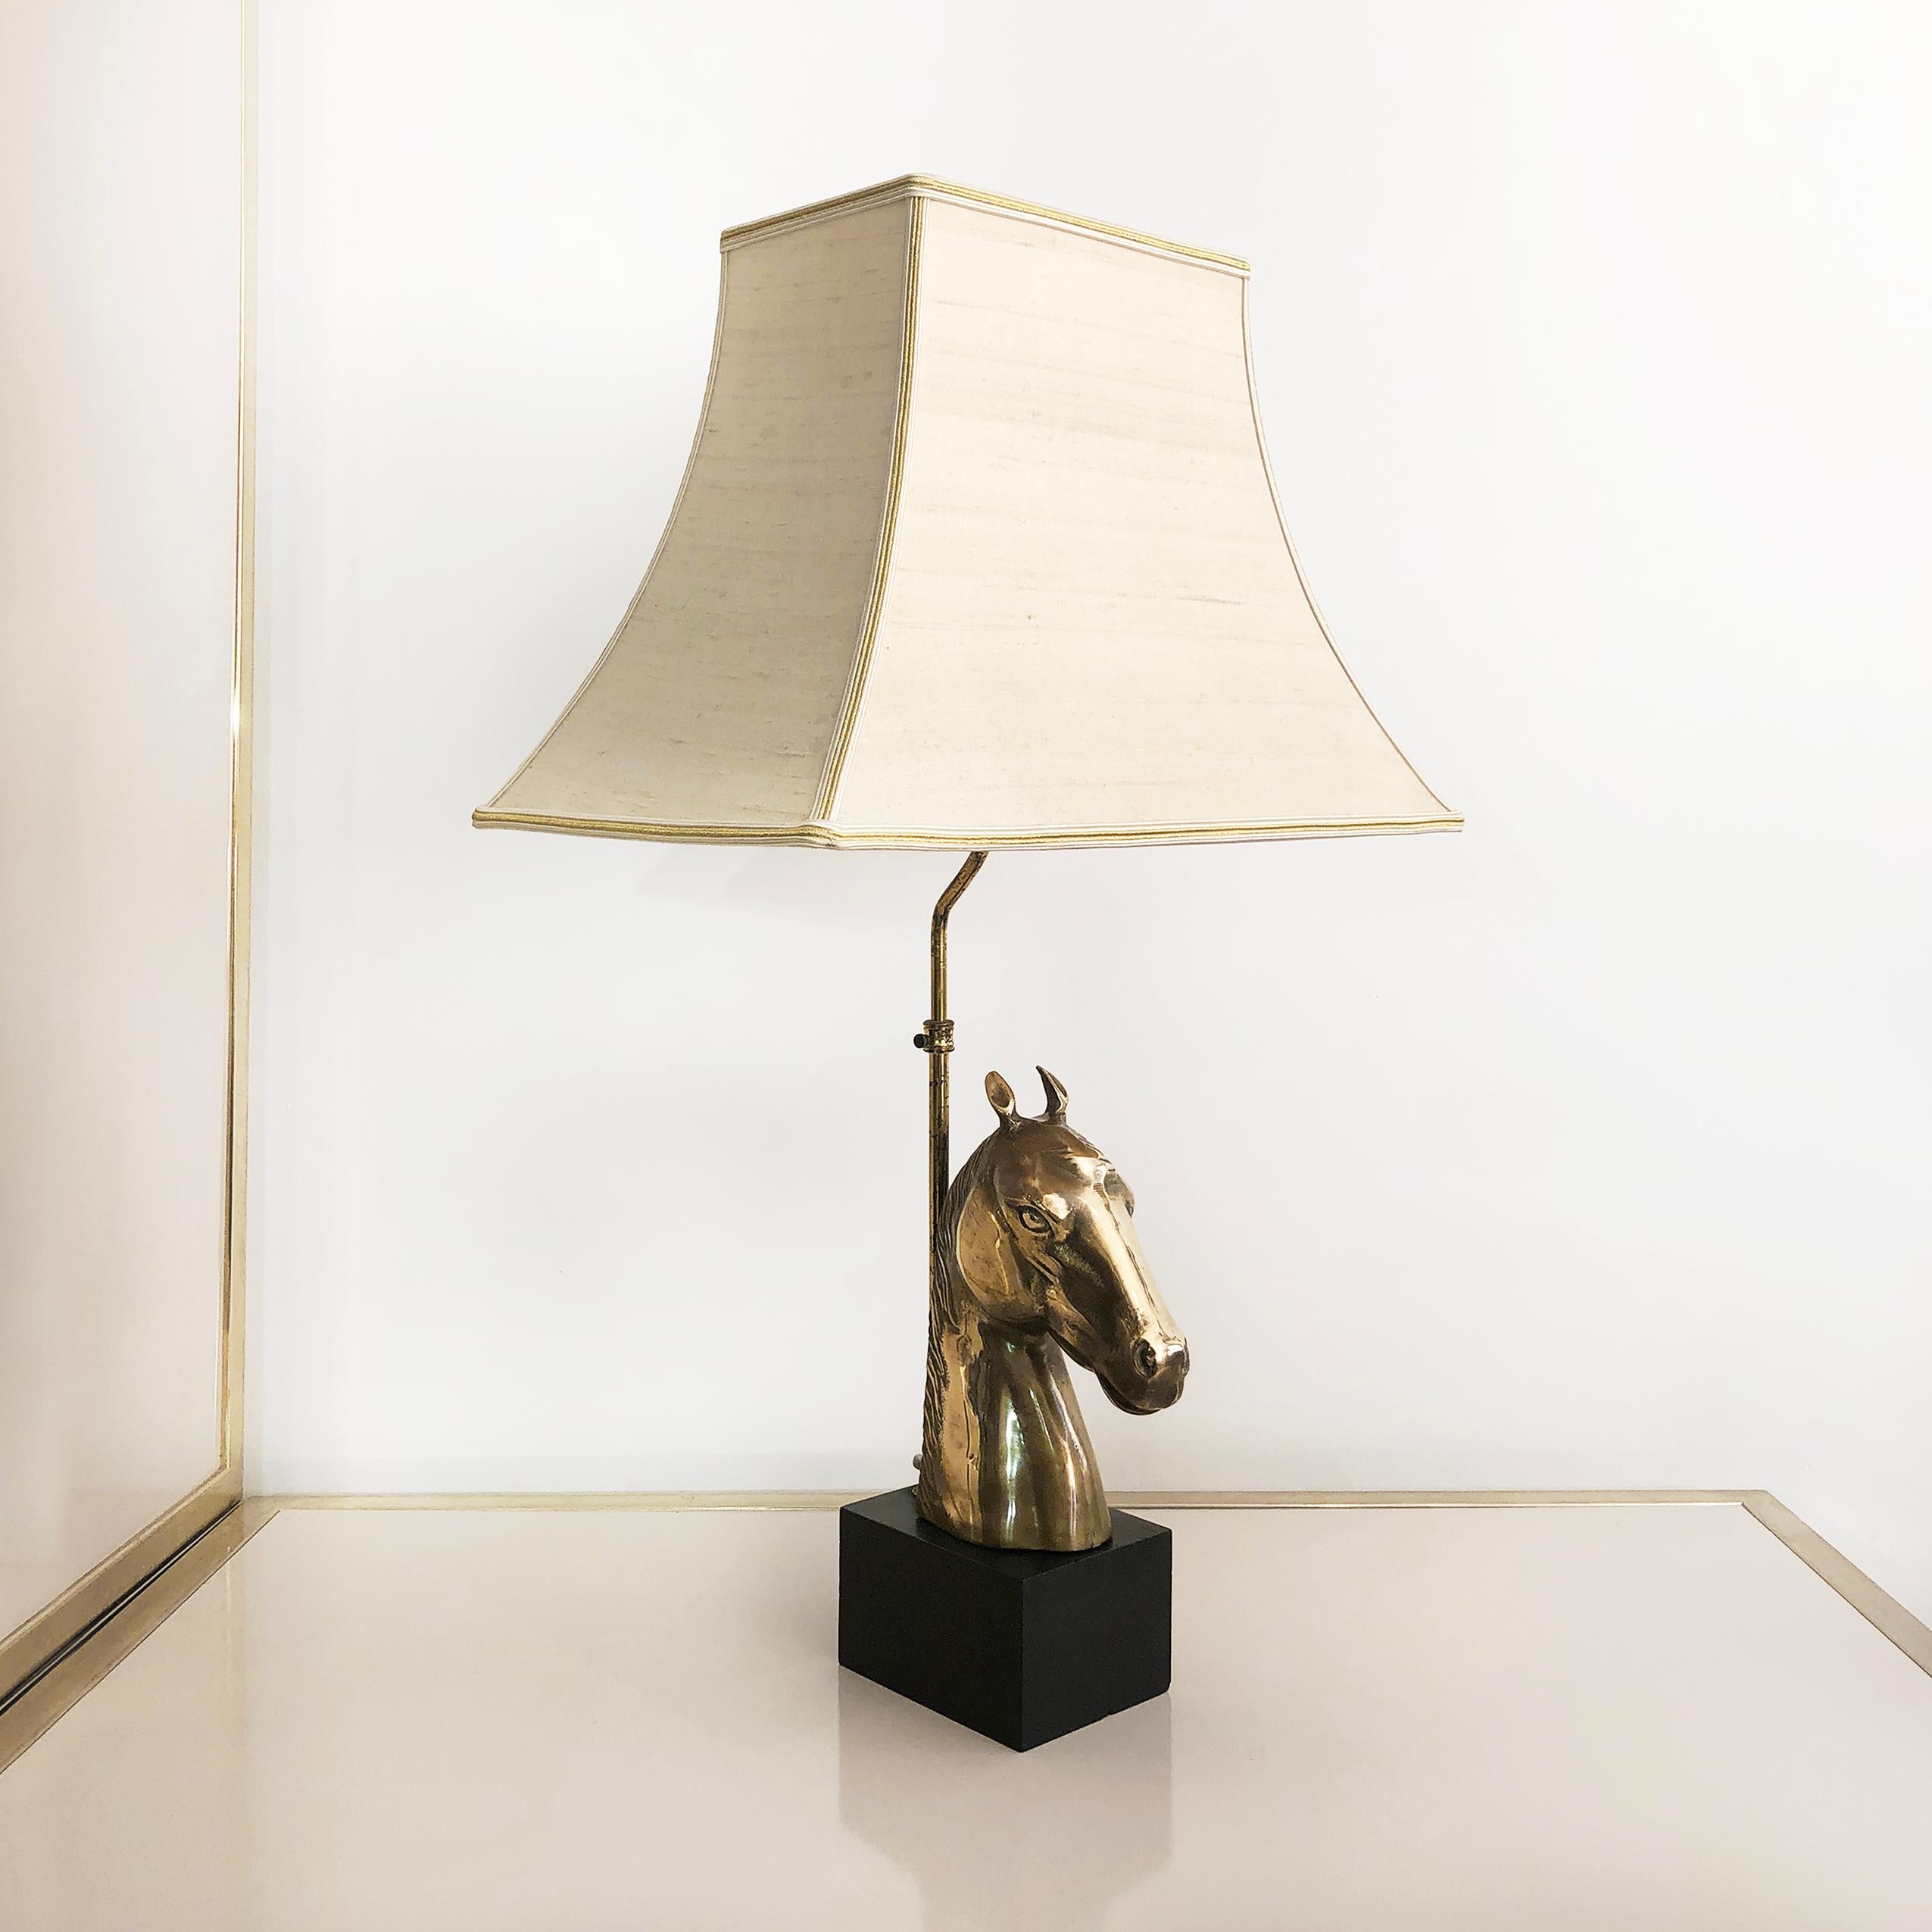 An impressive lamp in the shape of brass horse head is supported by a refinished black wooden cube, with chinoiserie shade. The cream square out scallop bell lampshade is very much in keeping with the grandeur of 1970s design.

It is currently